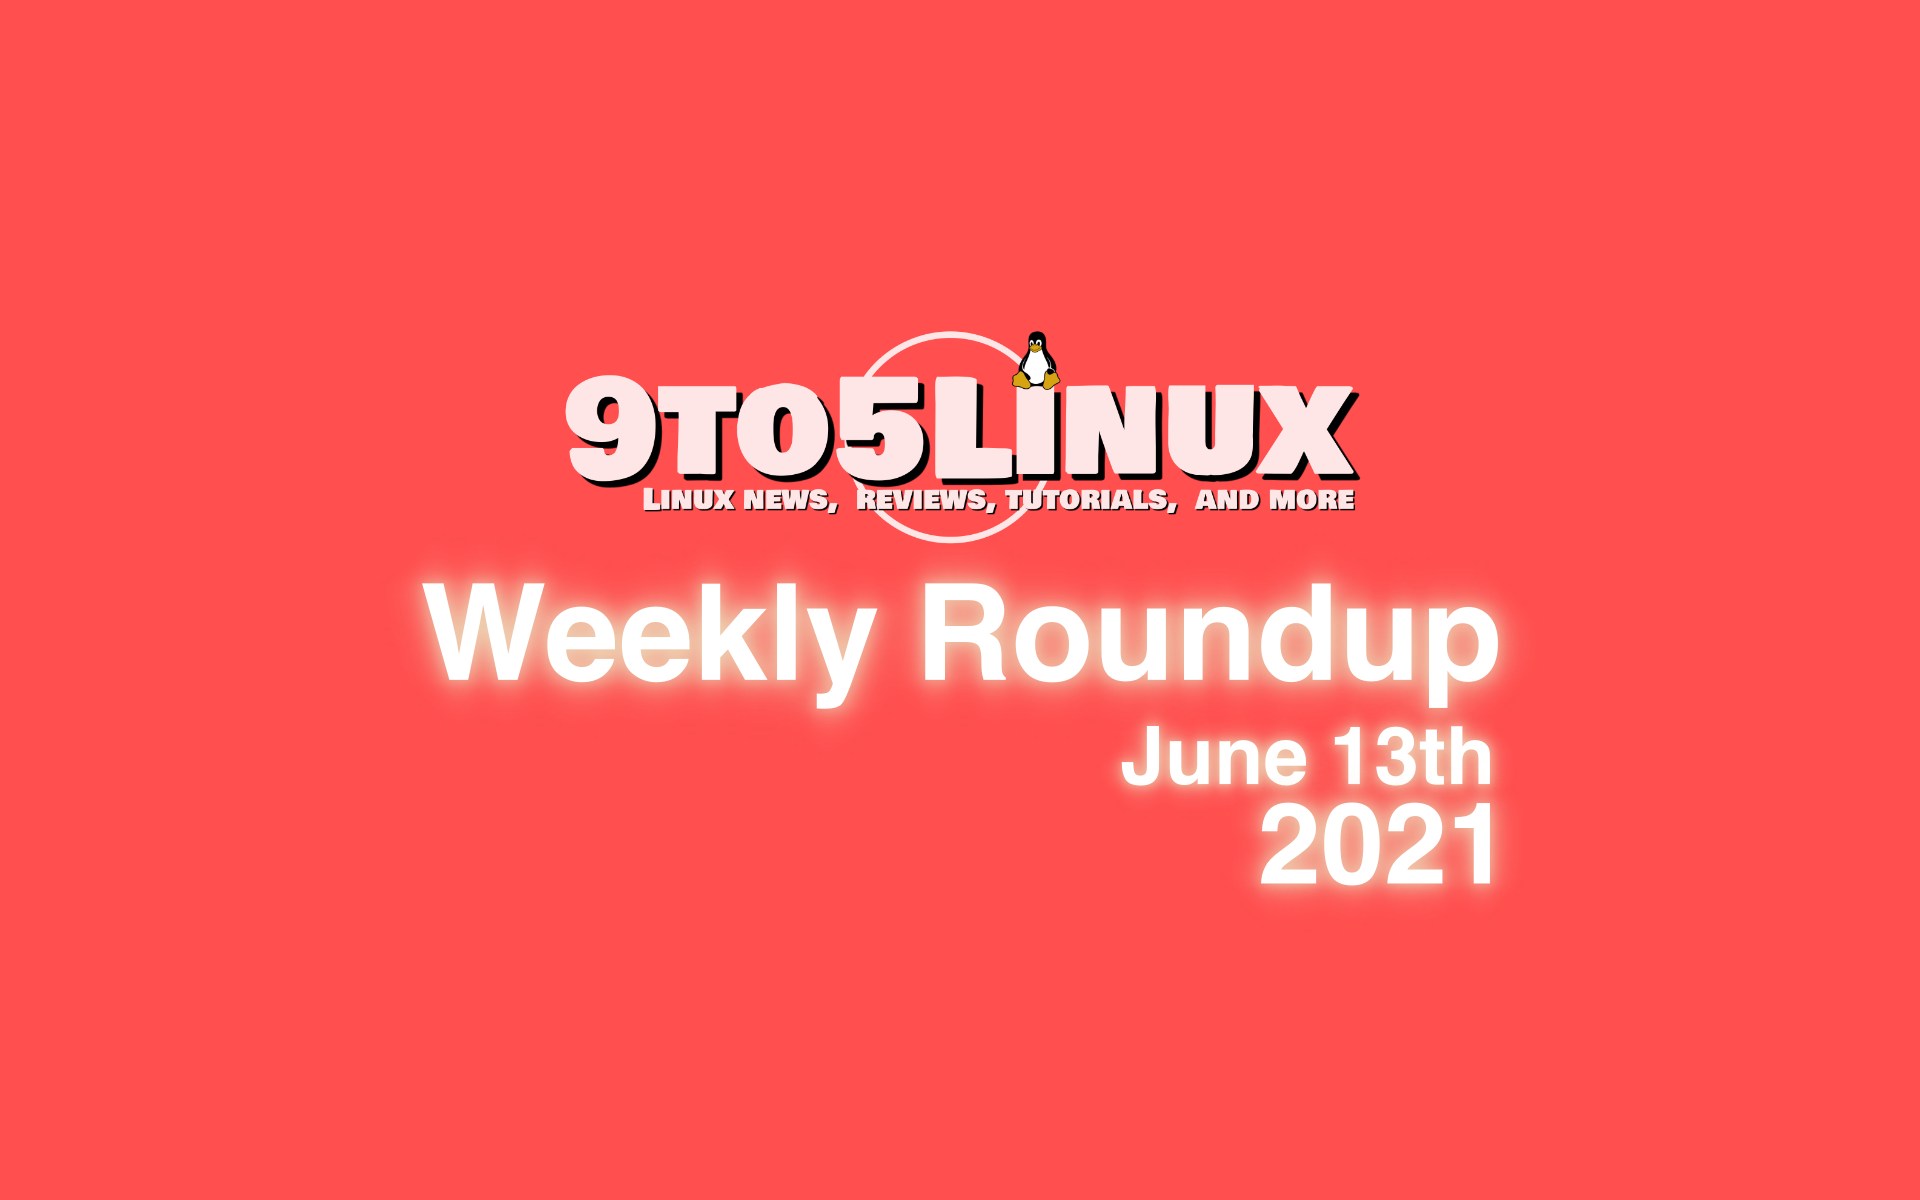 9to5Linux Weekly Roundup: June 13th, 2021